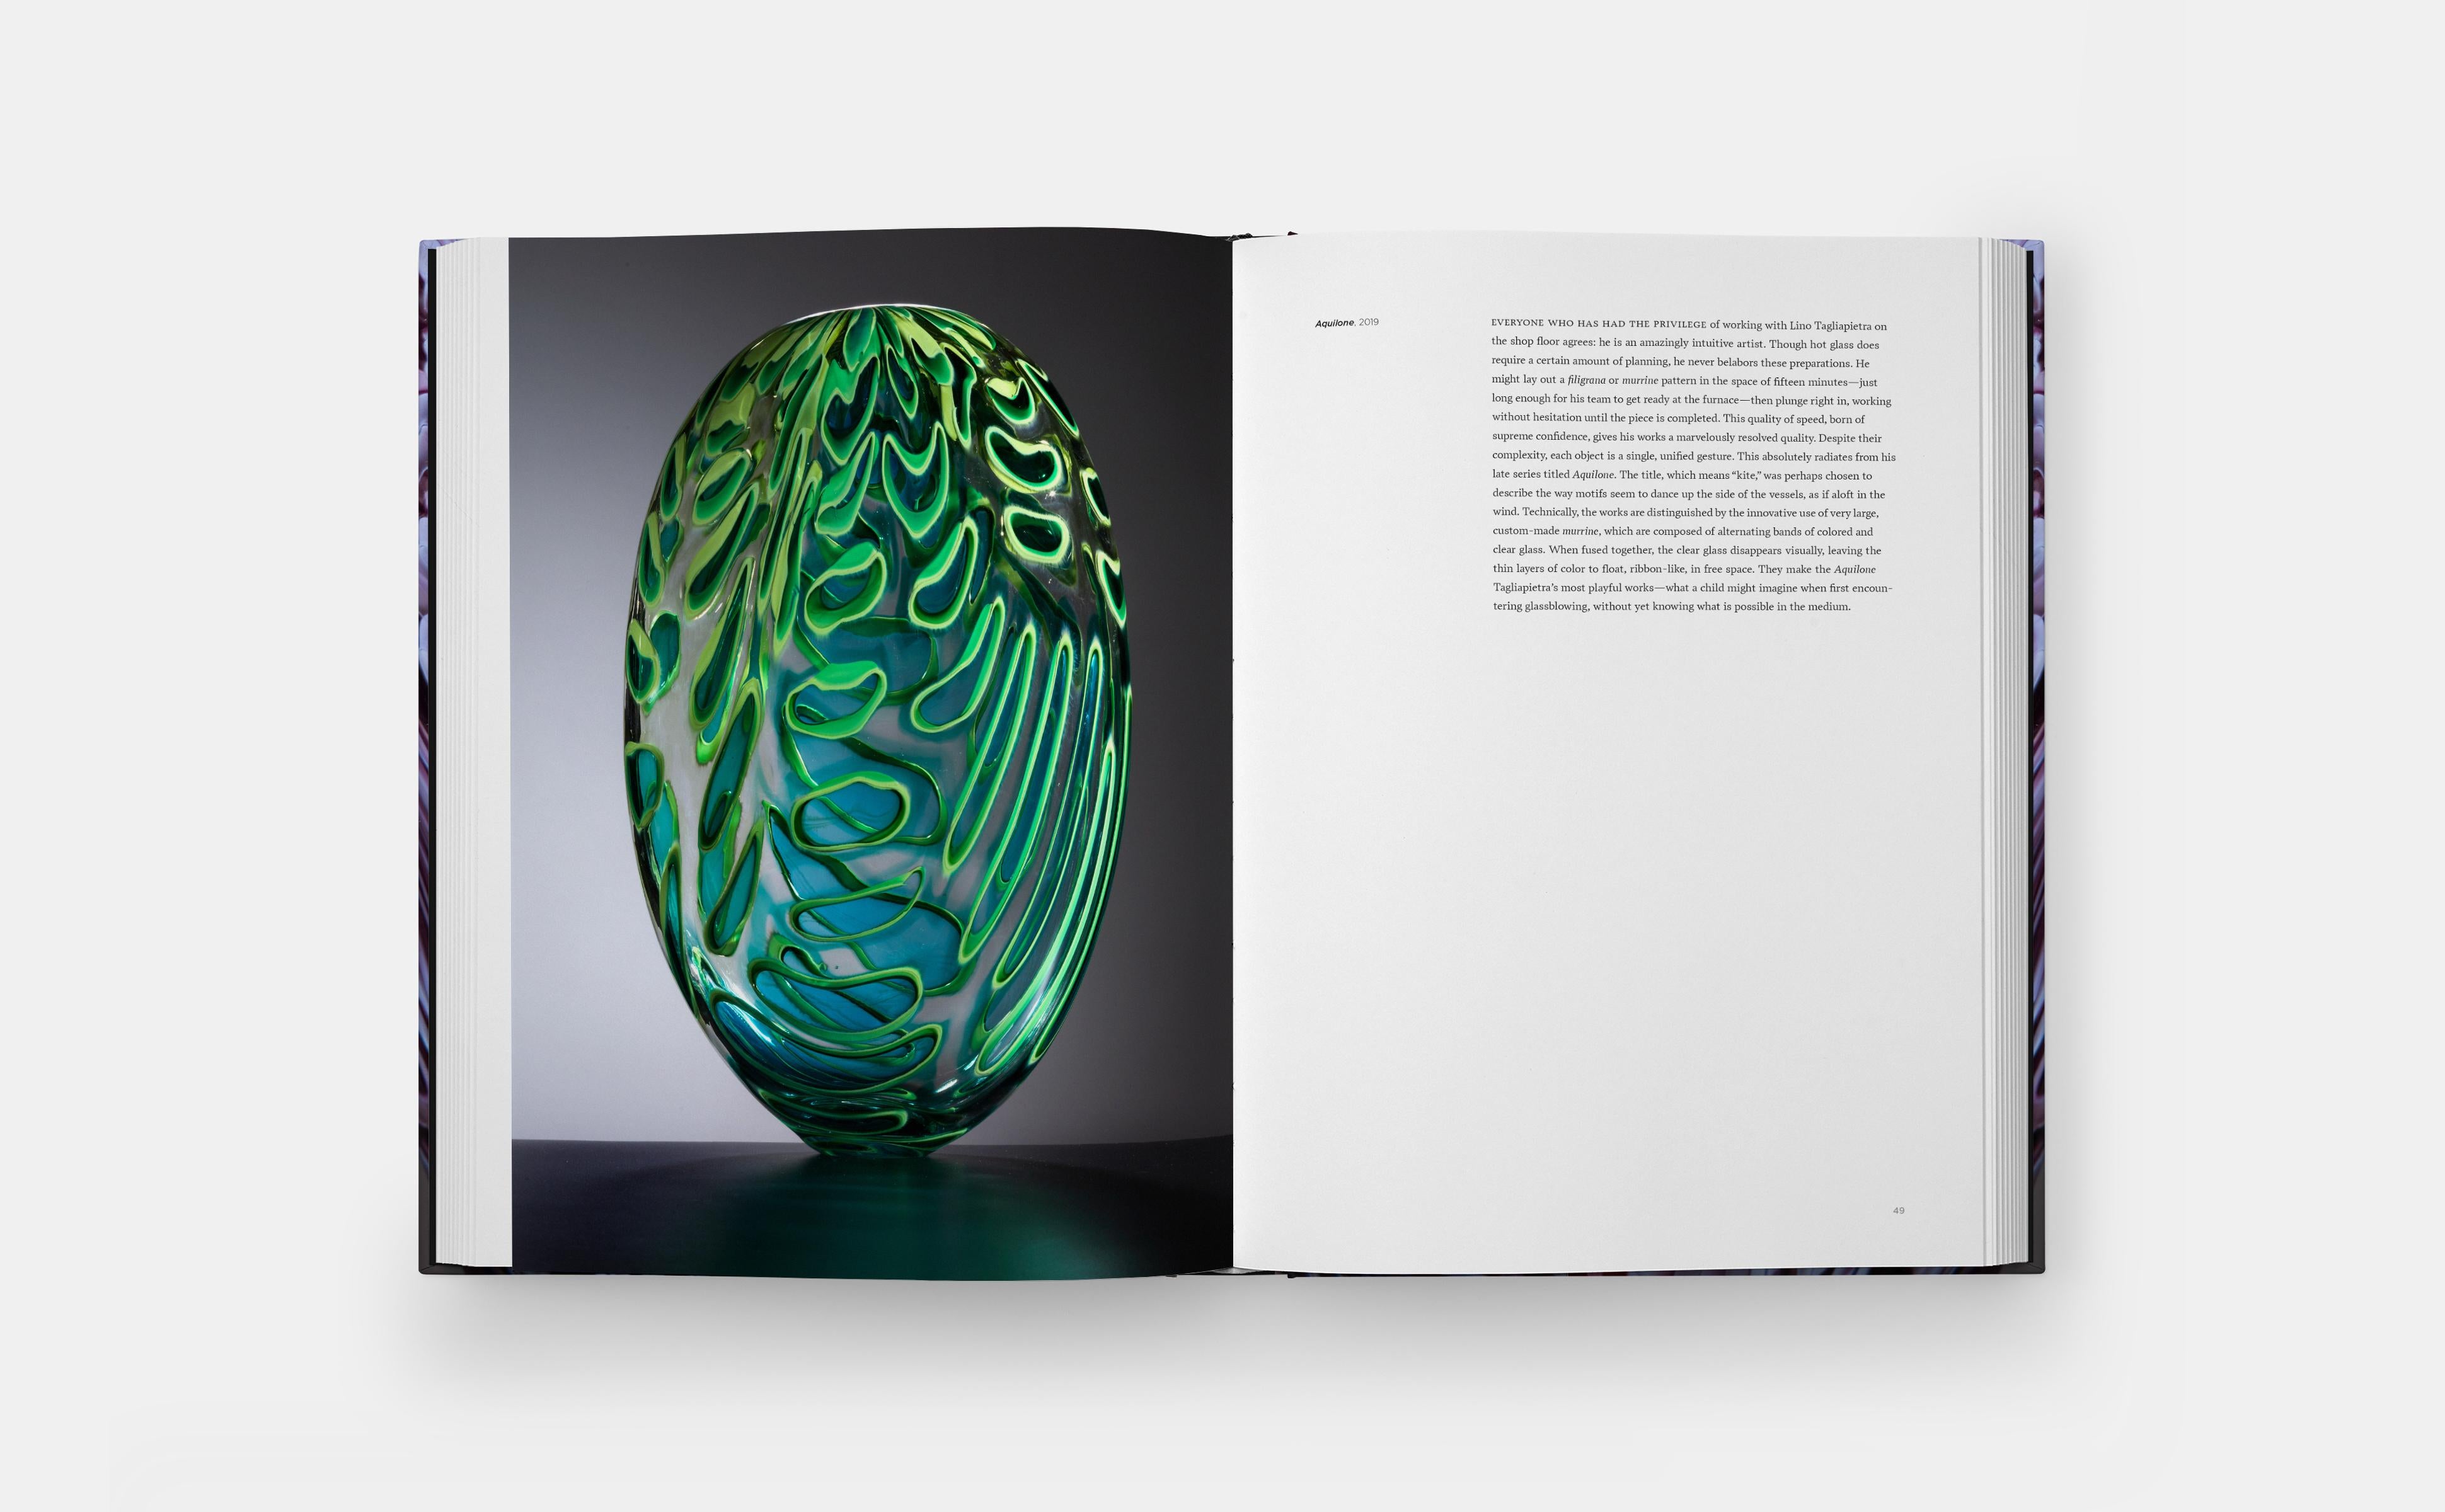 The most comprehensive monograph available on the greatest living glassblower, Lino Tagliapietra.

Lino Tagliapietra has been described as the world’s greatest glassblower, a figure born from the five-hundred-year-old culture of Venetian glass,